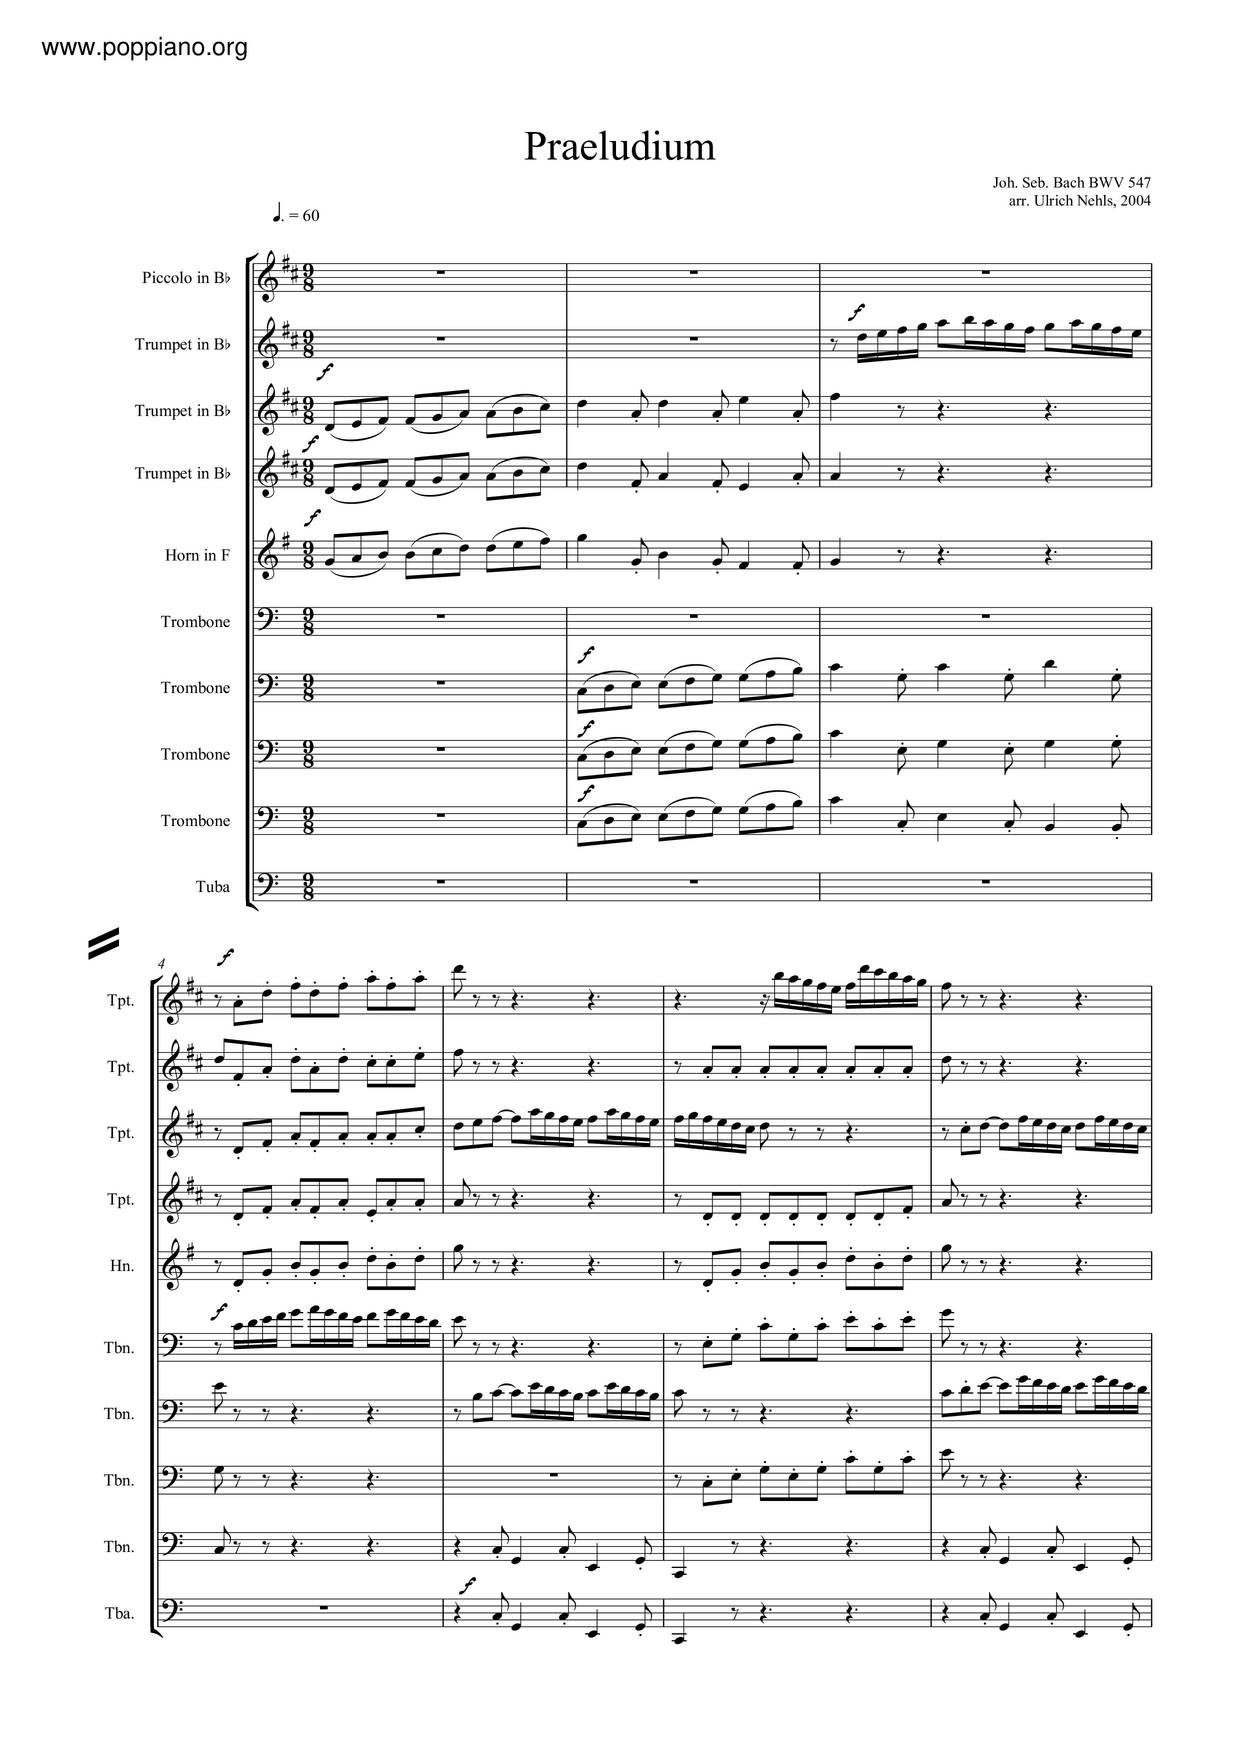 Prelude And Fugue In C Major, BWV 547 Score